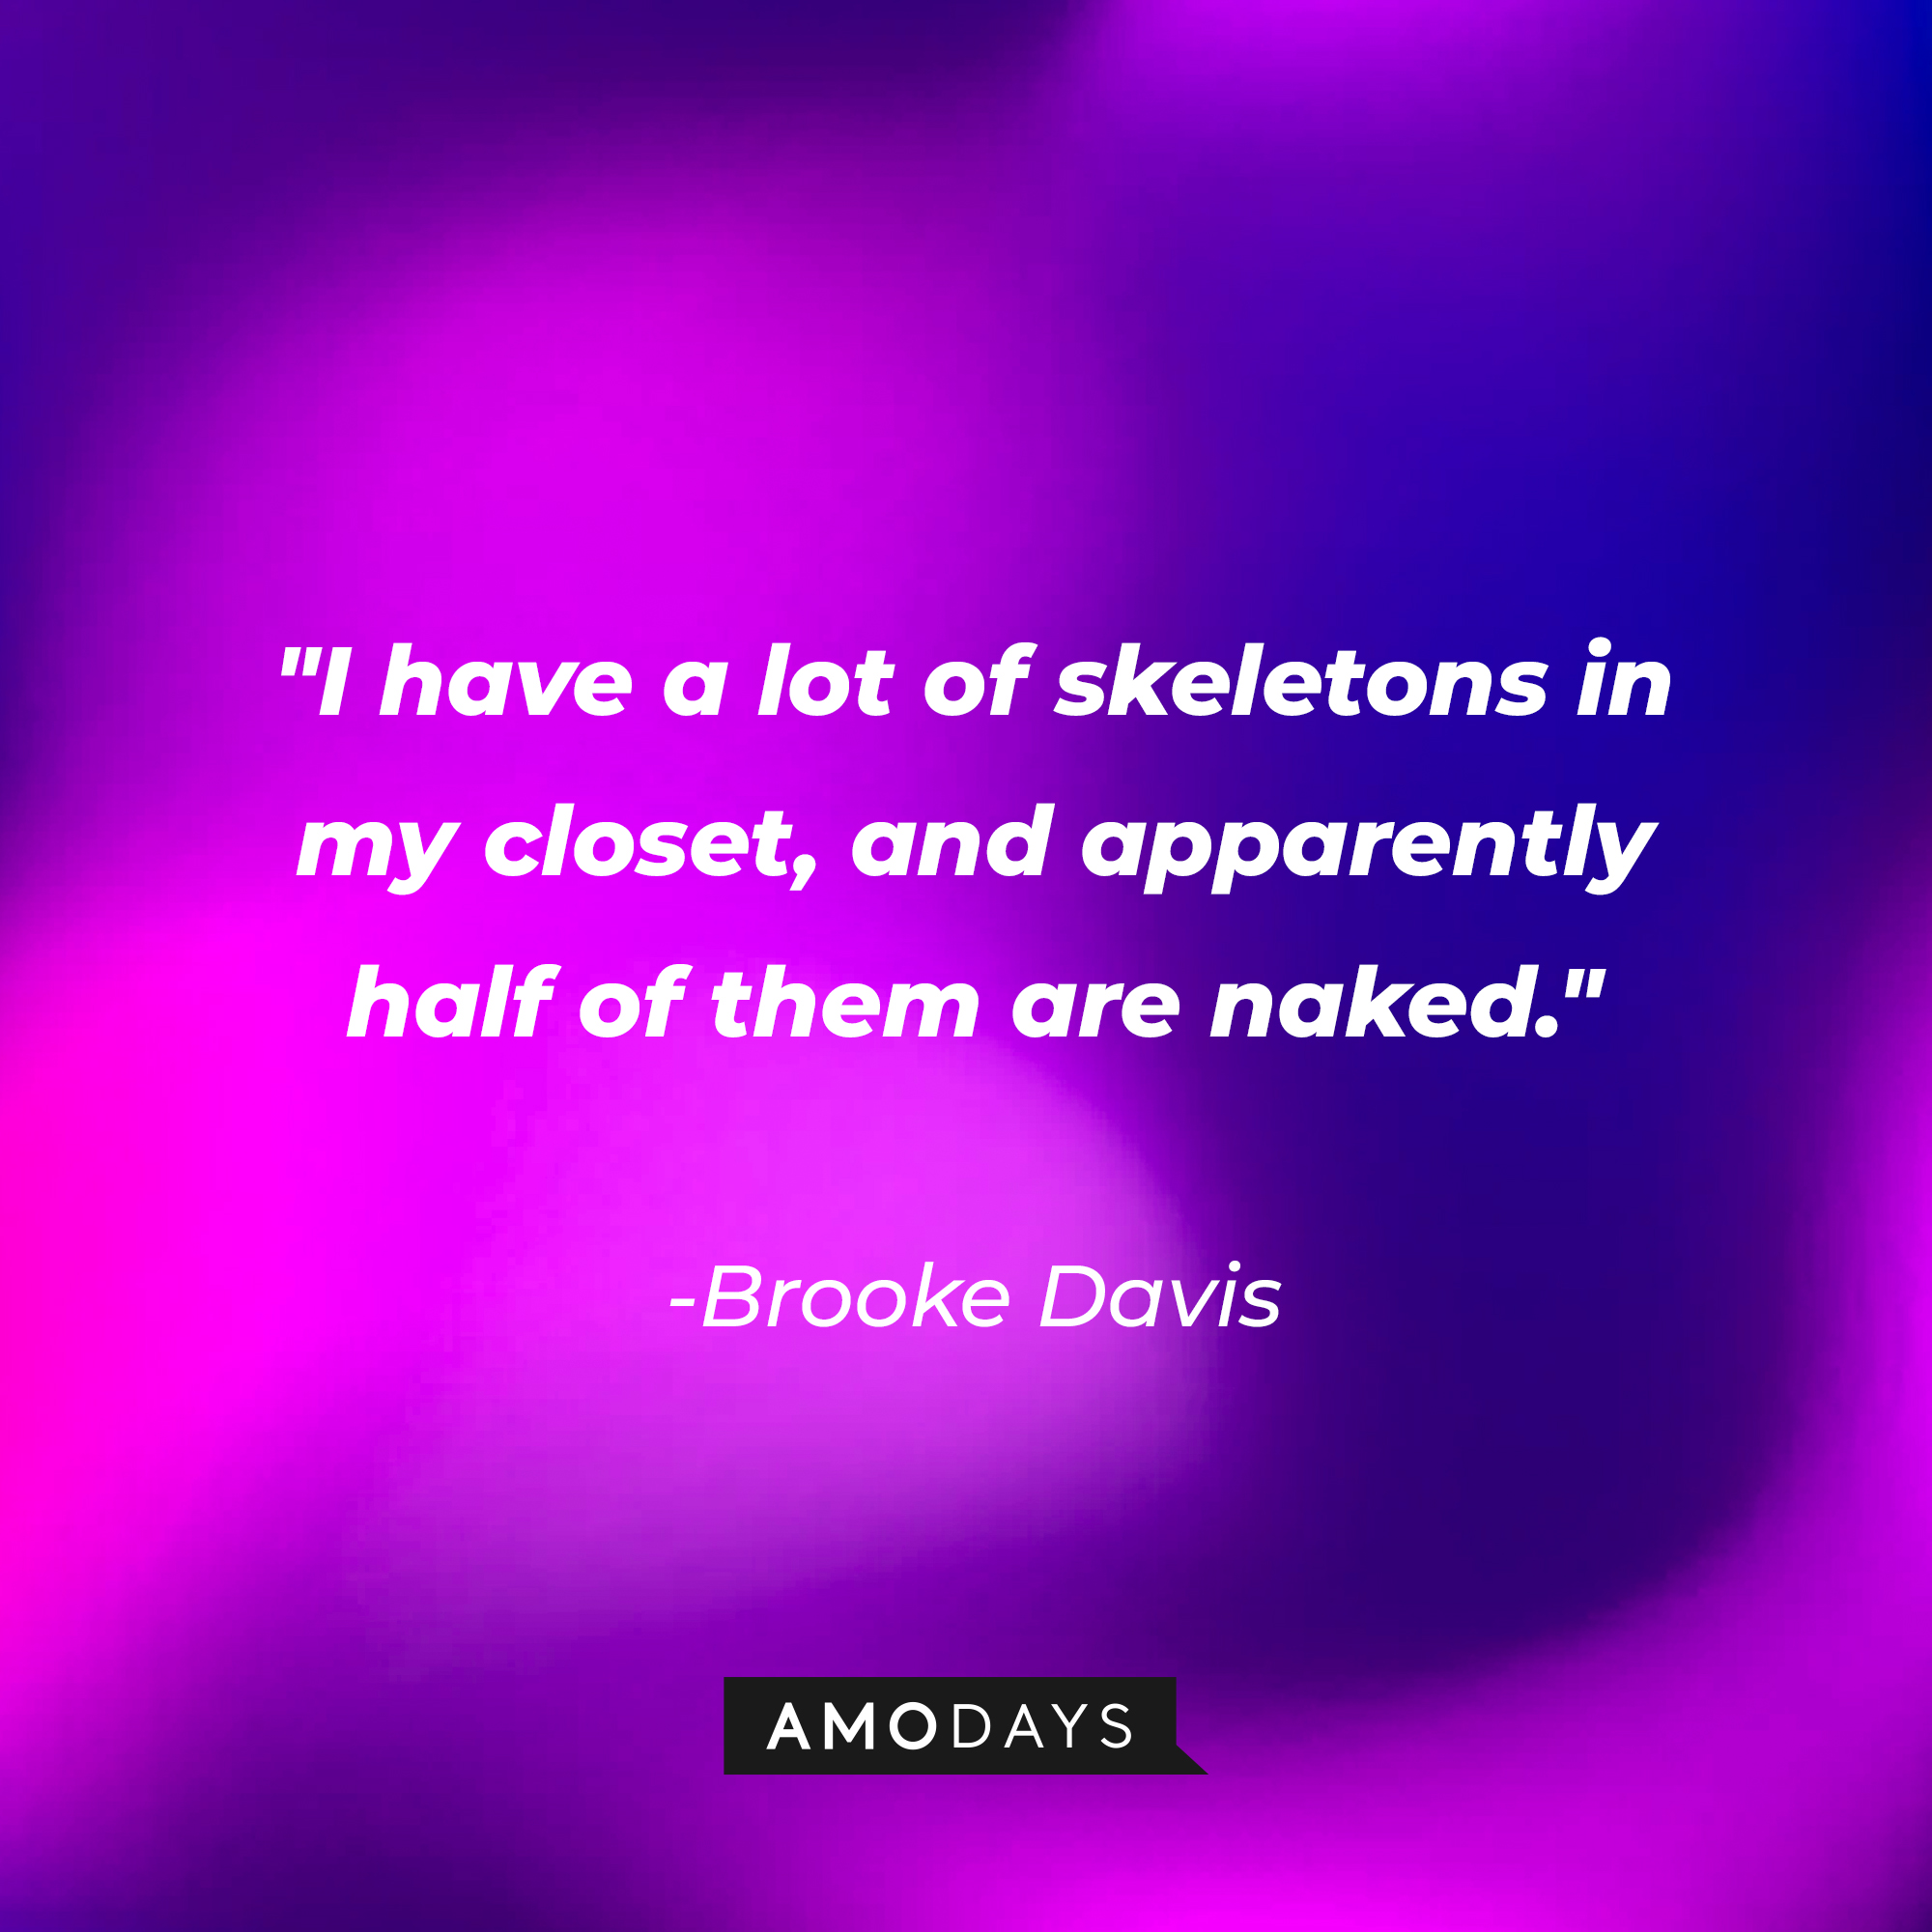 Brooke Davis' quote: "I have a lot of skeletons in my closet, and apparently half of them are naked." | Source: AmoDays